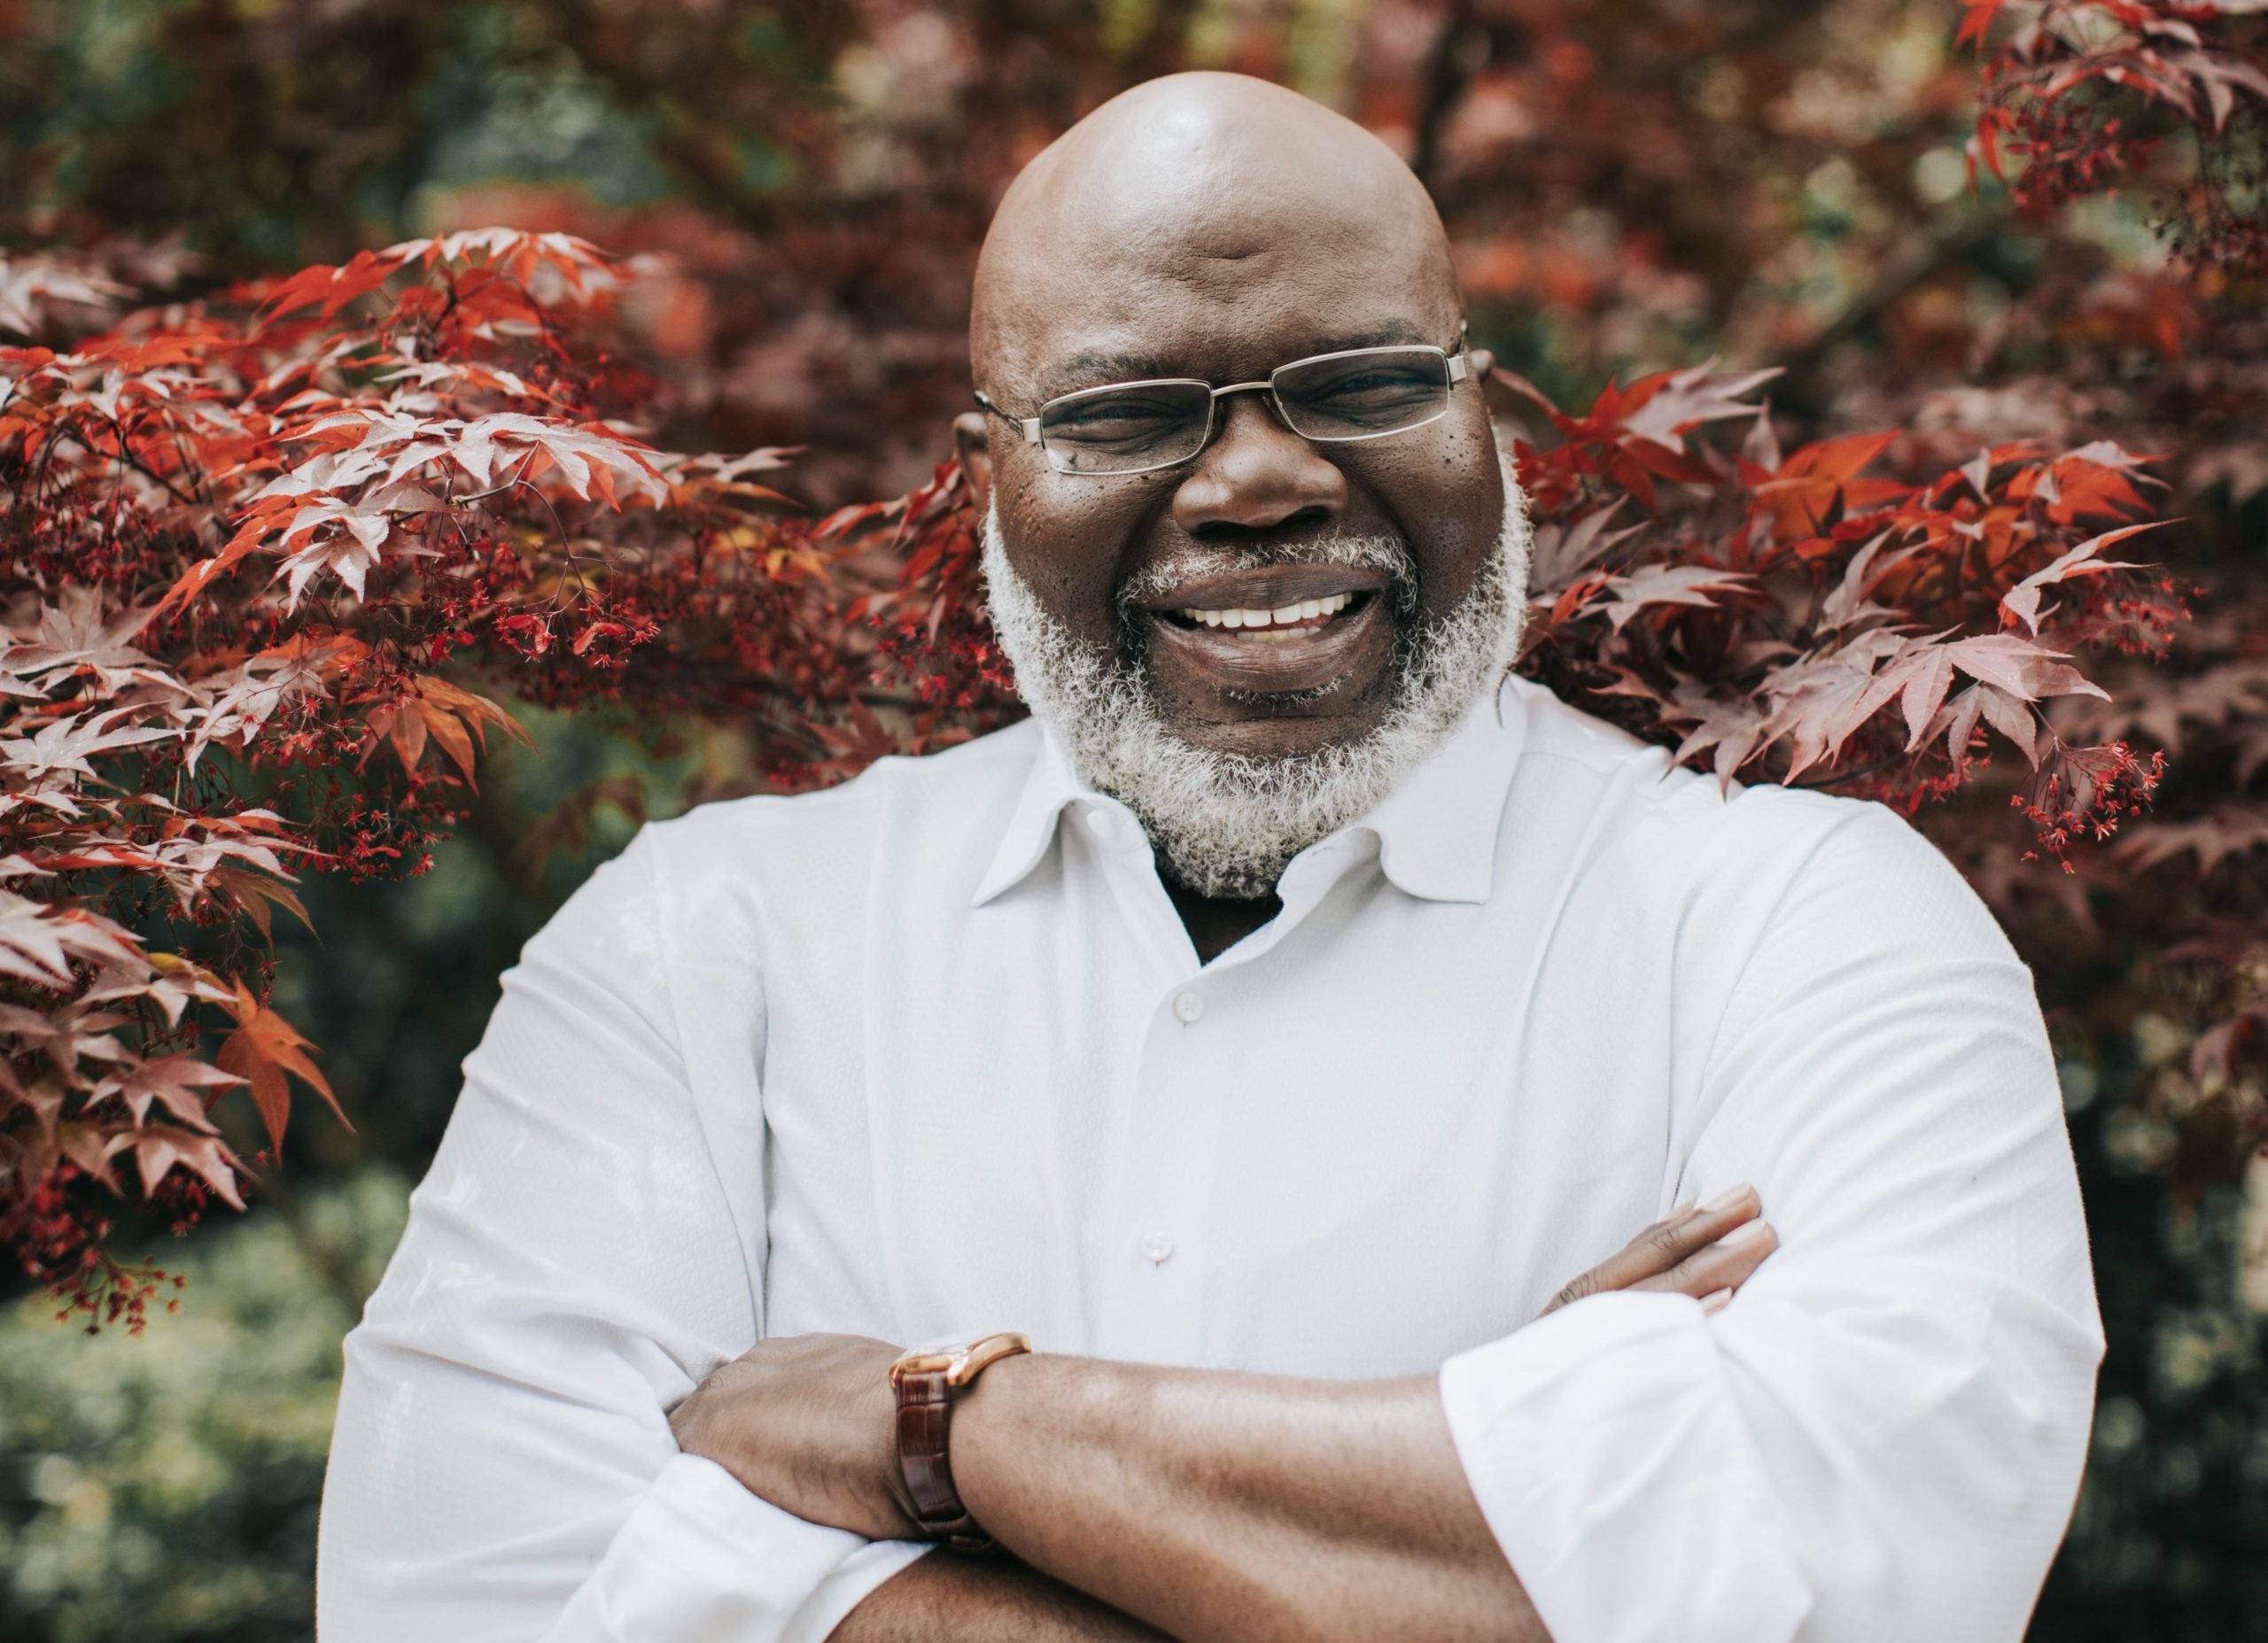 WATCH: Bishop T.D. Jakes Takes The Word Mainstream With 'Wrath' And 'Greed' Films